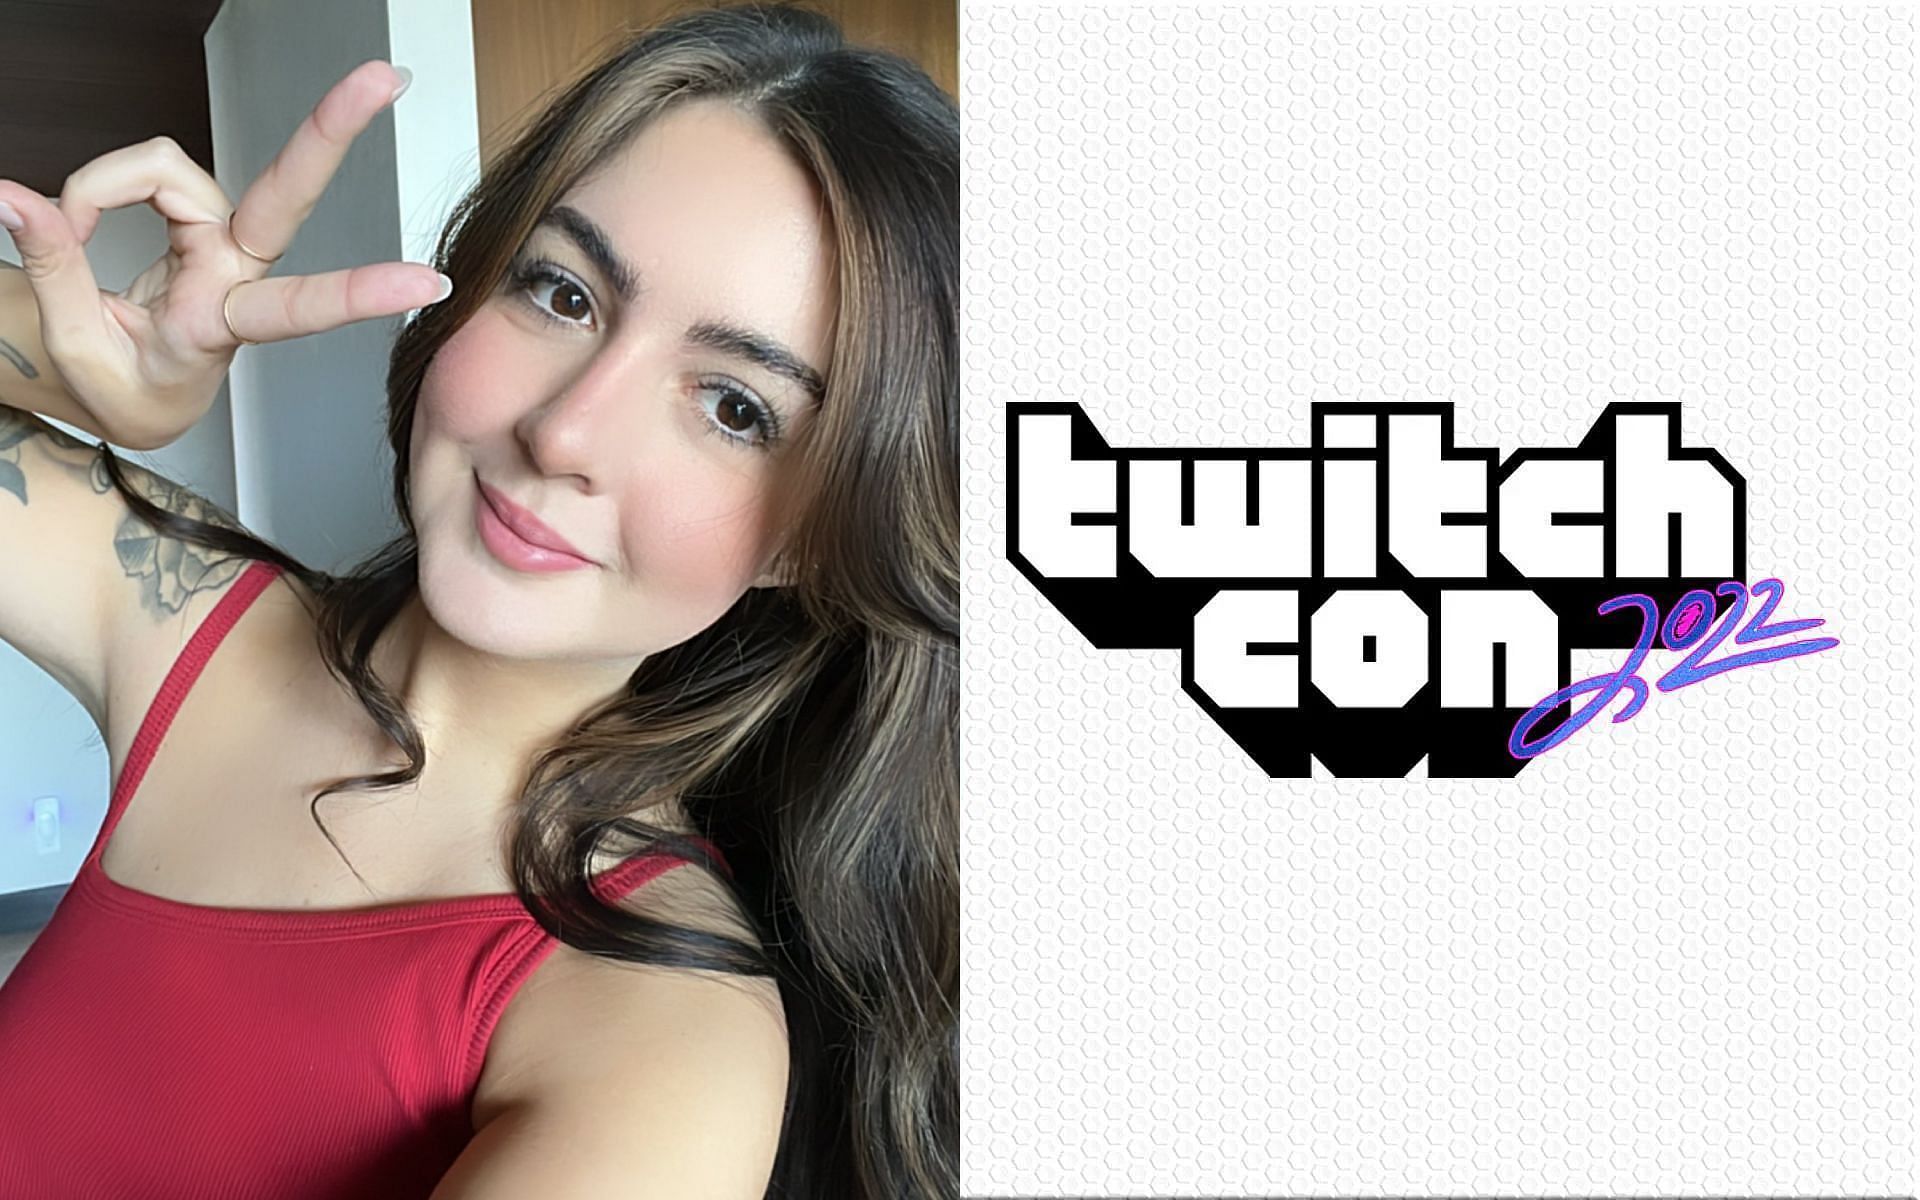 "I'm on the verge of tears": Twitch streamer Bnans skips TwitchCon 2022 after almost having a panic attack